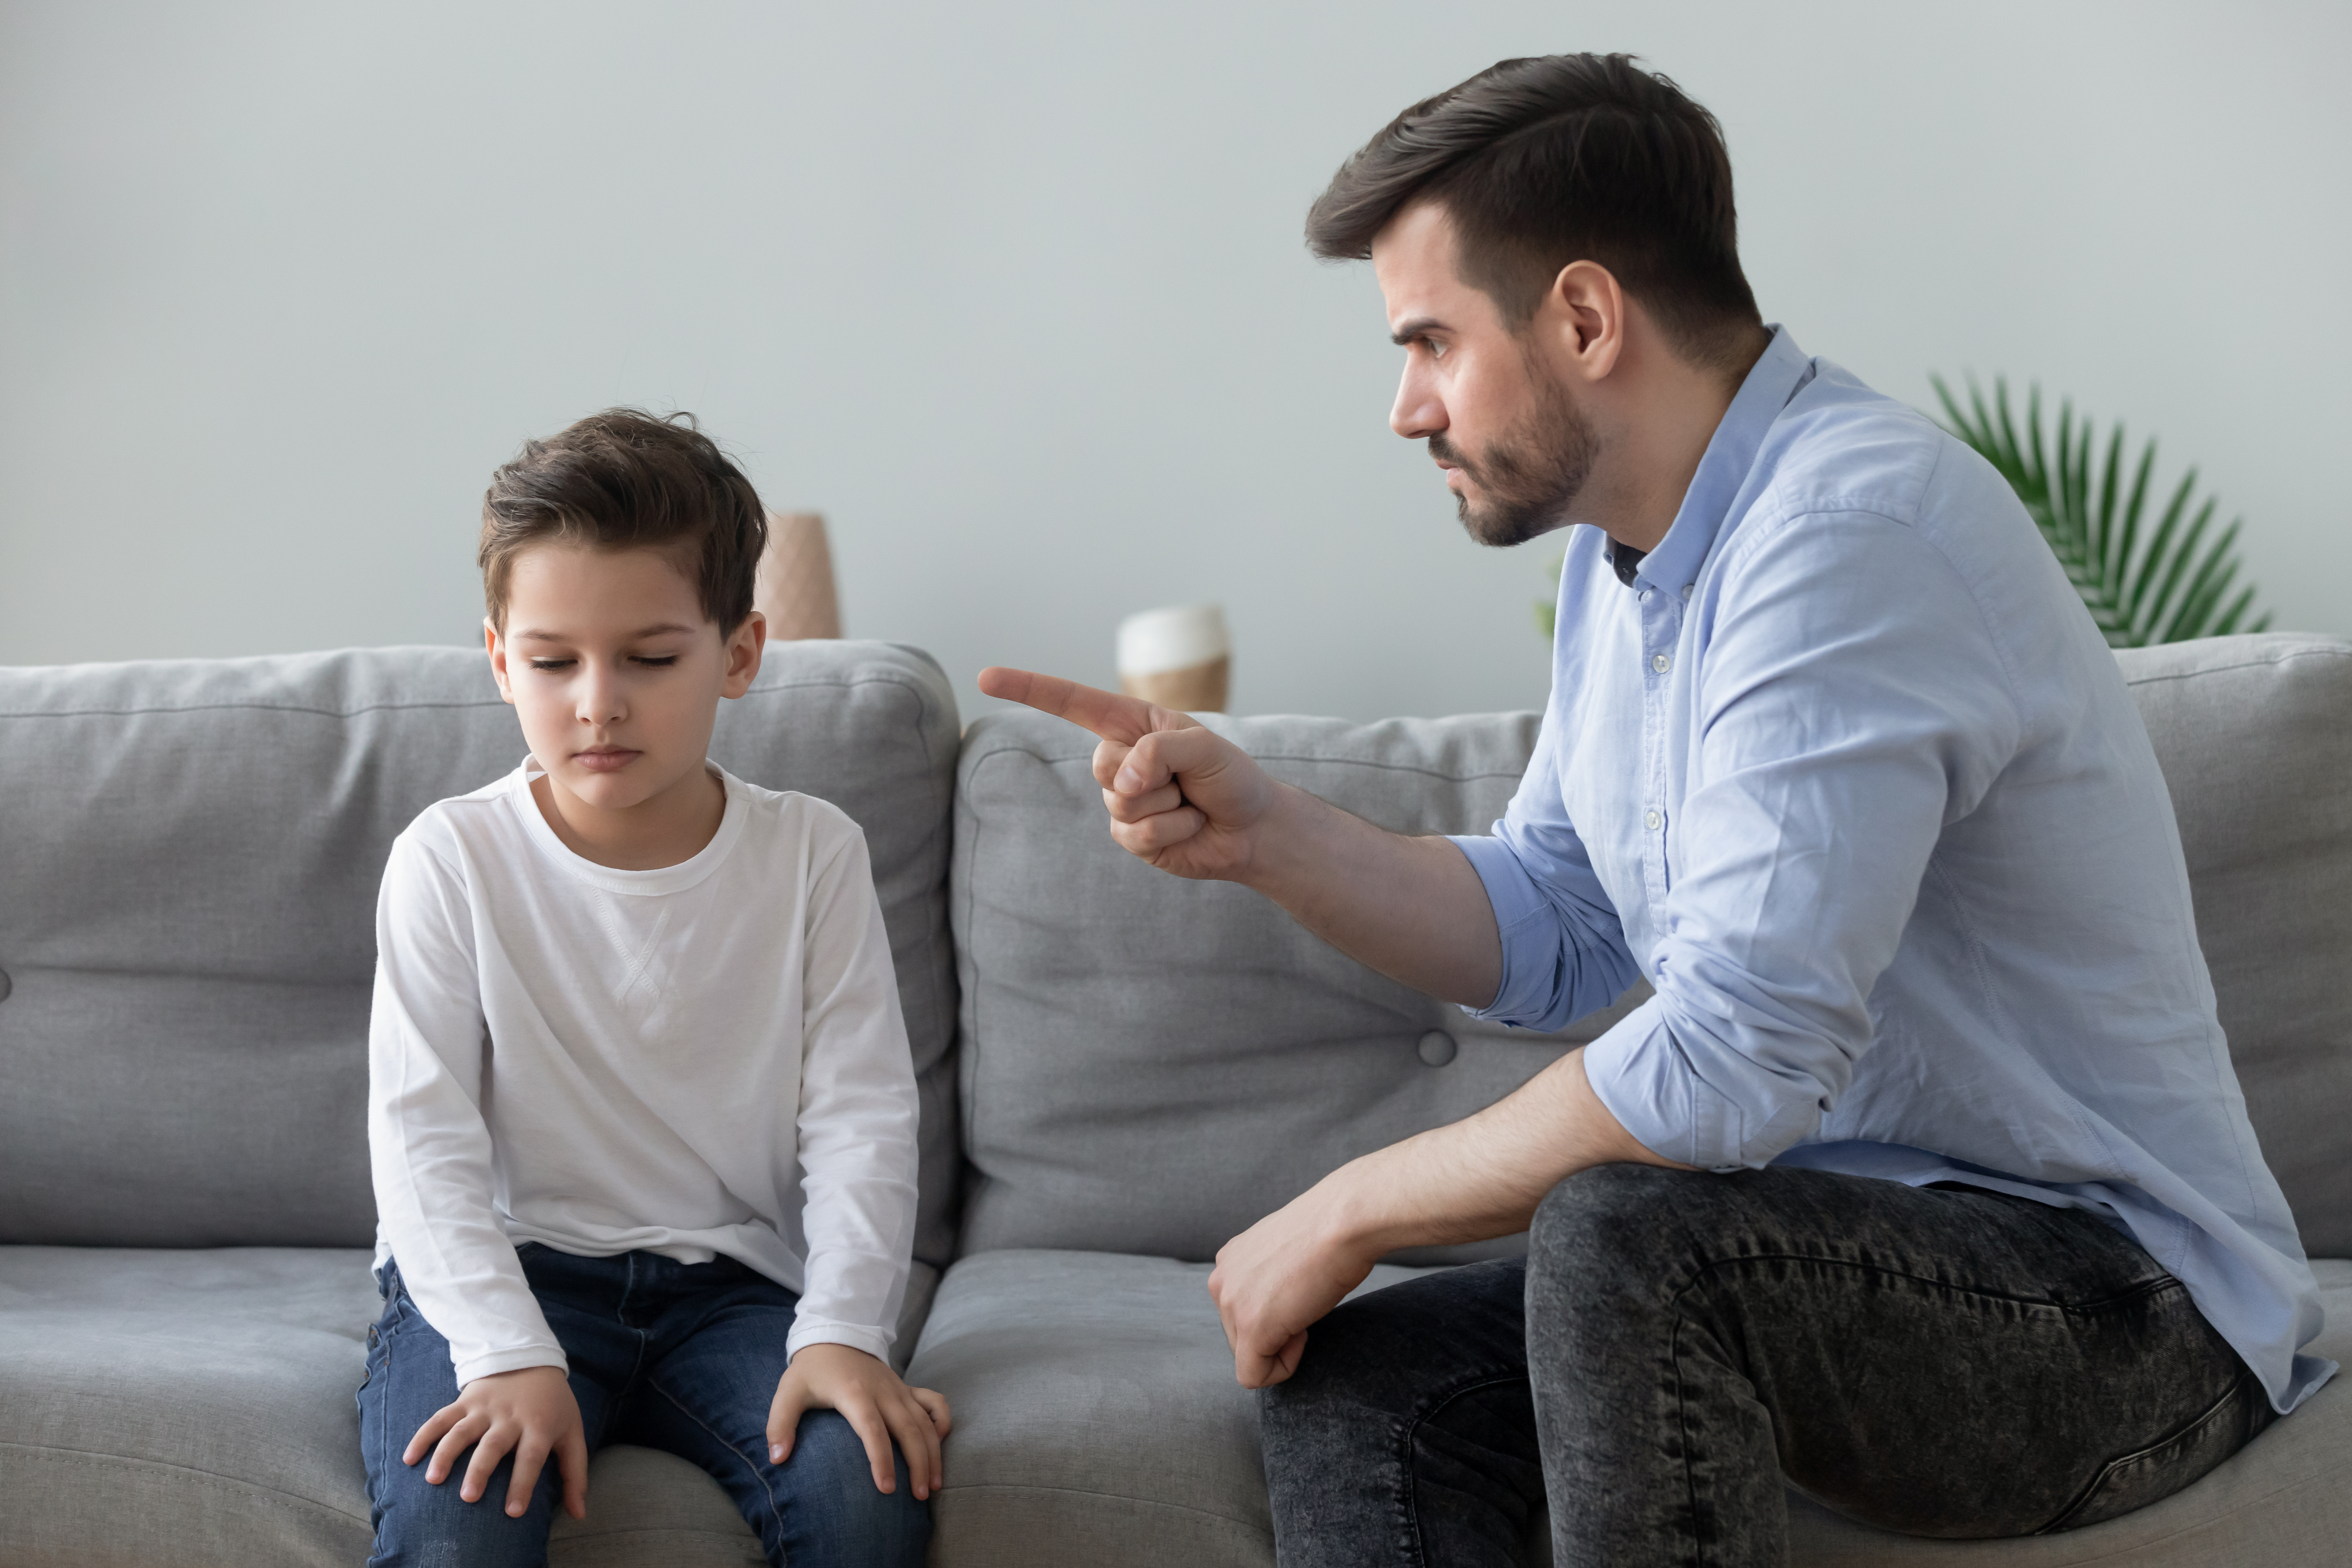 An angry man scolding a young child | Source: Shutterstock